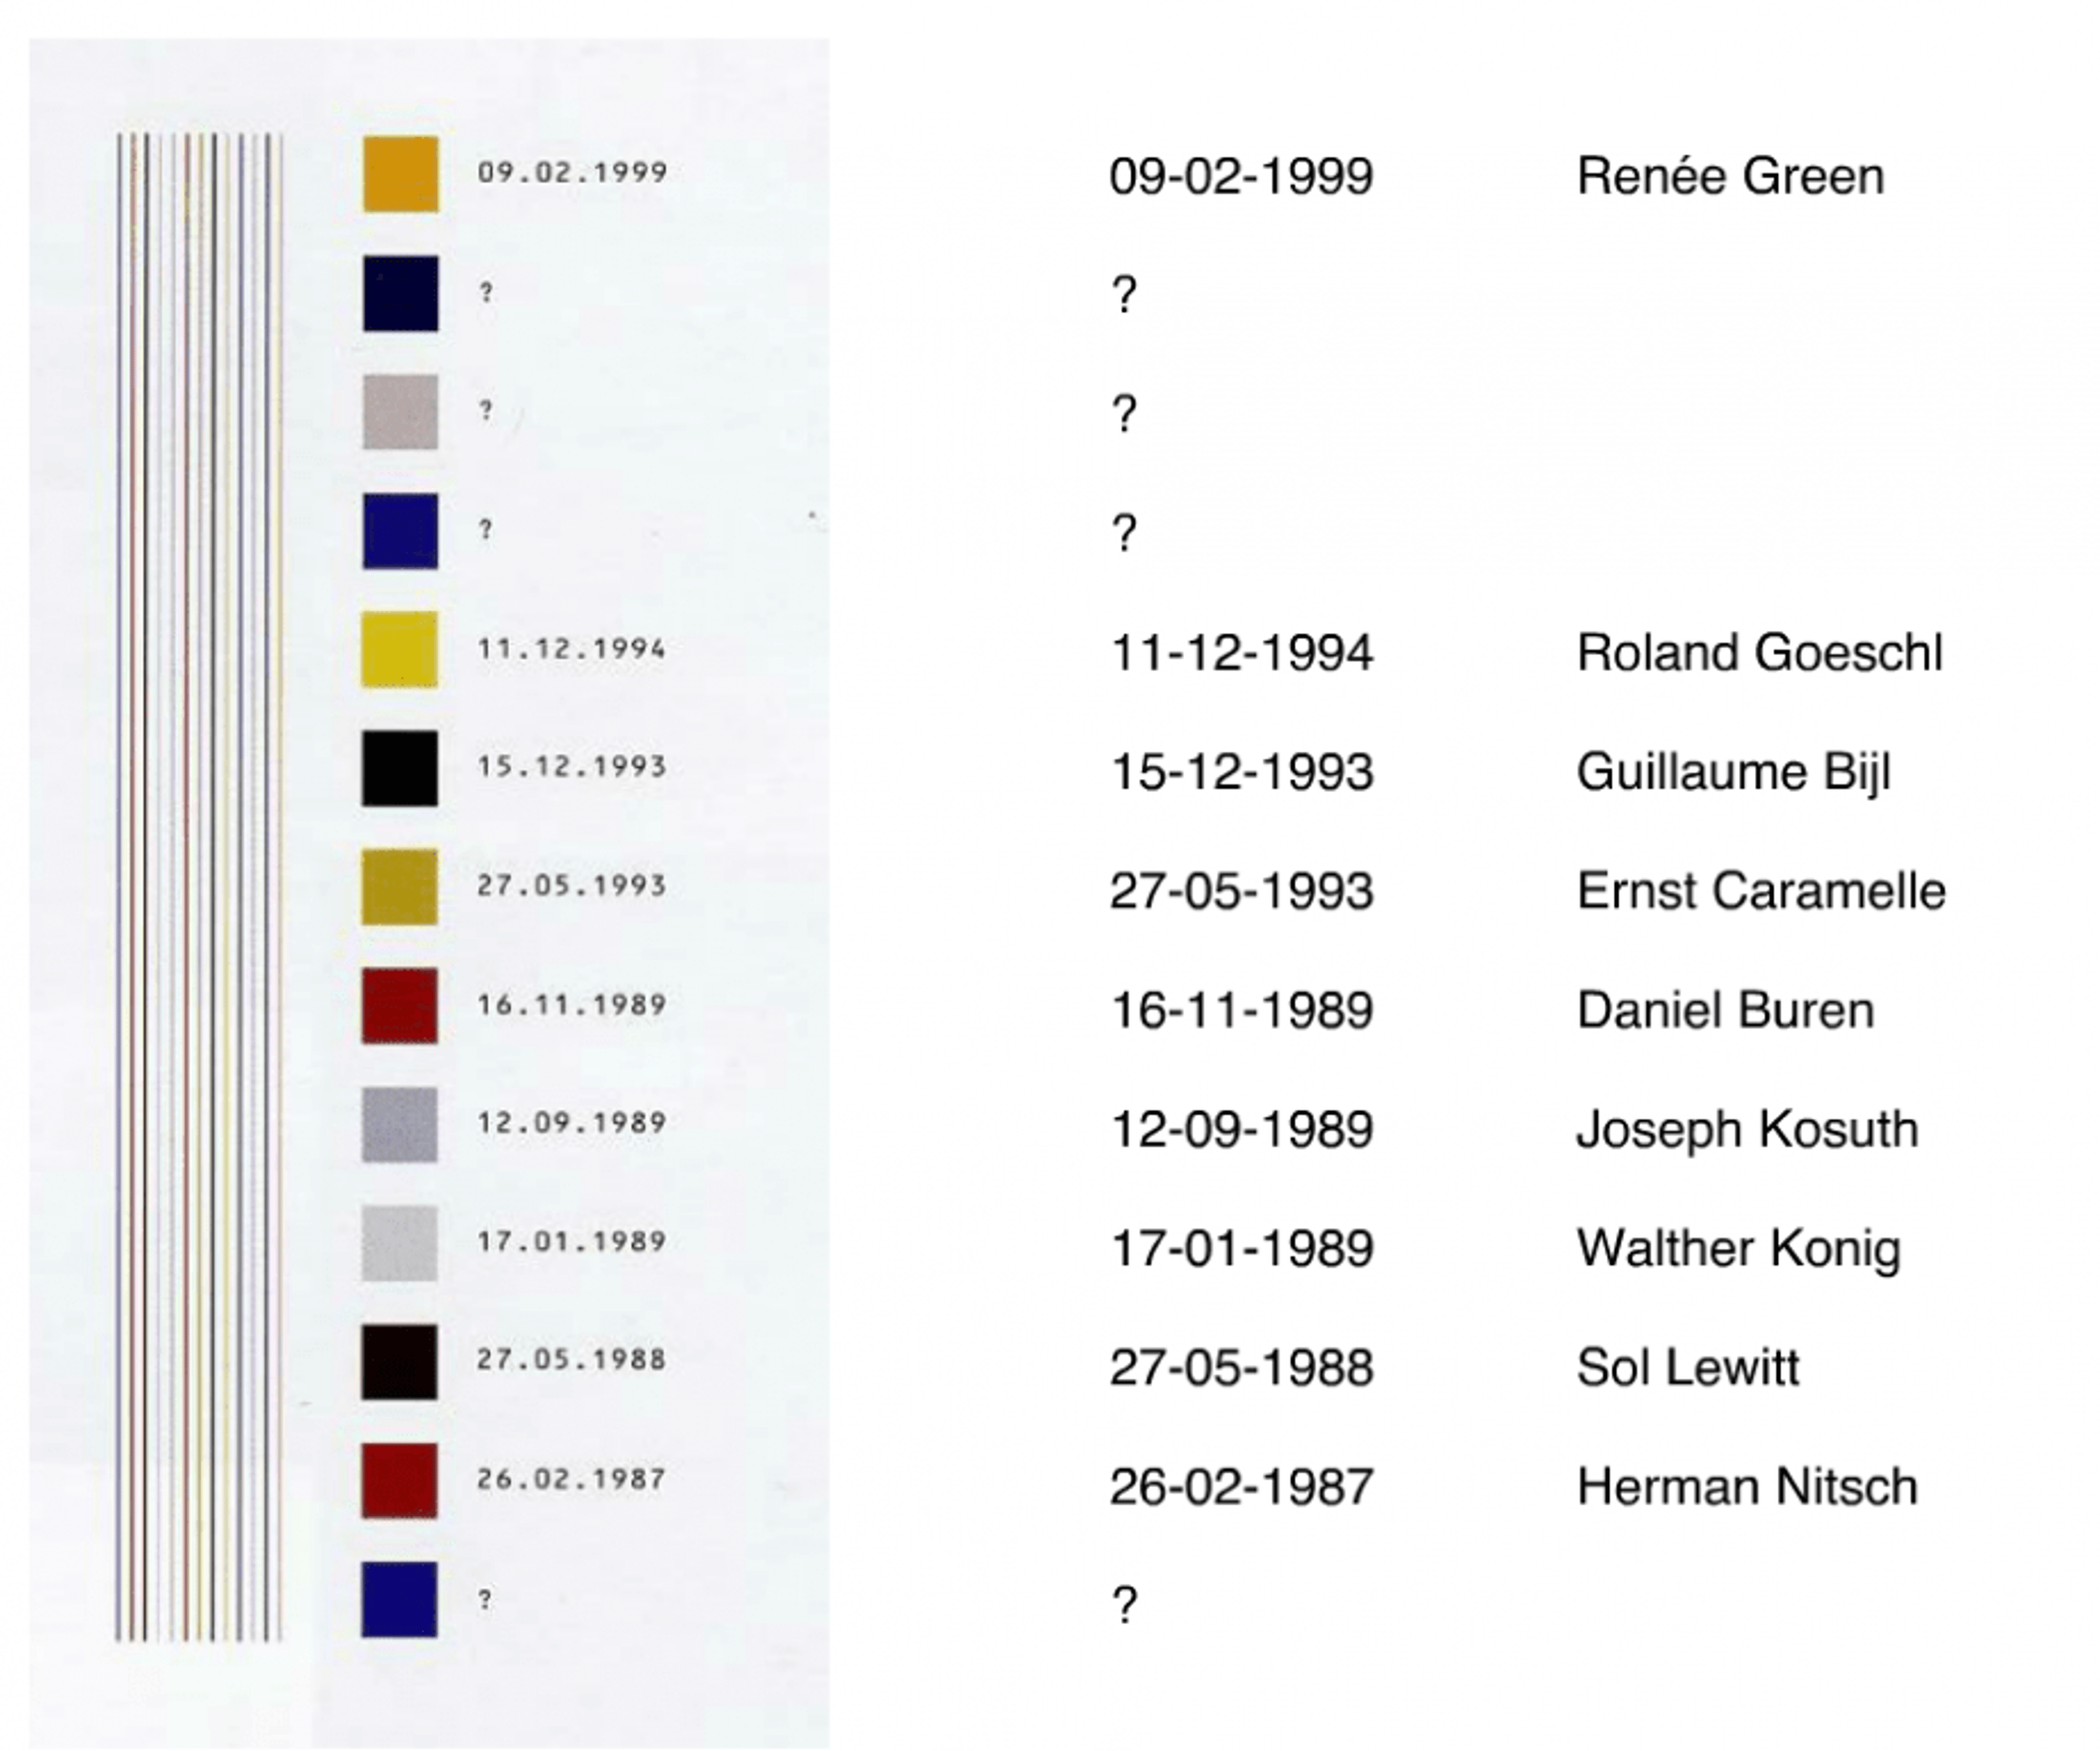 Chart of chronology of the Vienna Secession showing names of all artists that have exhibited there, the color of the wall, and the date exhibited. Artists include Renee Green (09-02-1999), followed by three unidentified paint colors, Roland Goeshl (11-12-1994), Guillaume Bijil (15-12-1993), Ernst Caramelle (27-05-1993), Daniel Buren (16-11-1989), Joseph Kosuth (12-09-1989), Walther Konig (17-01-1989), Sol Lewitt (27-05-1988), Herman Nitsch (26-02-1987), and lastly another unidentified paint color